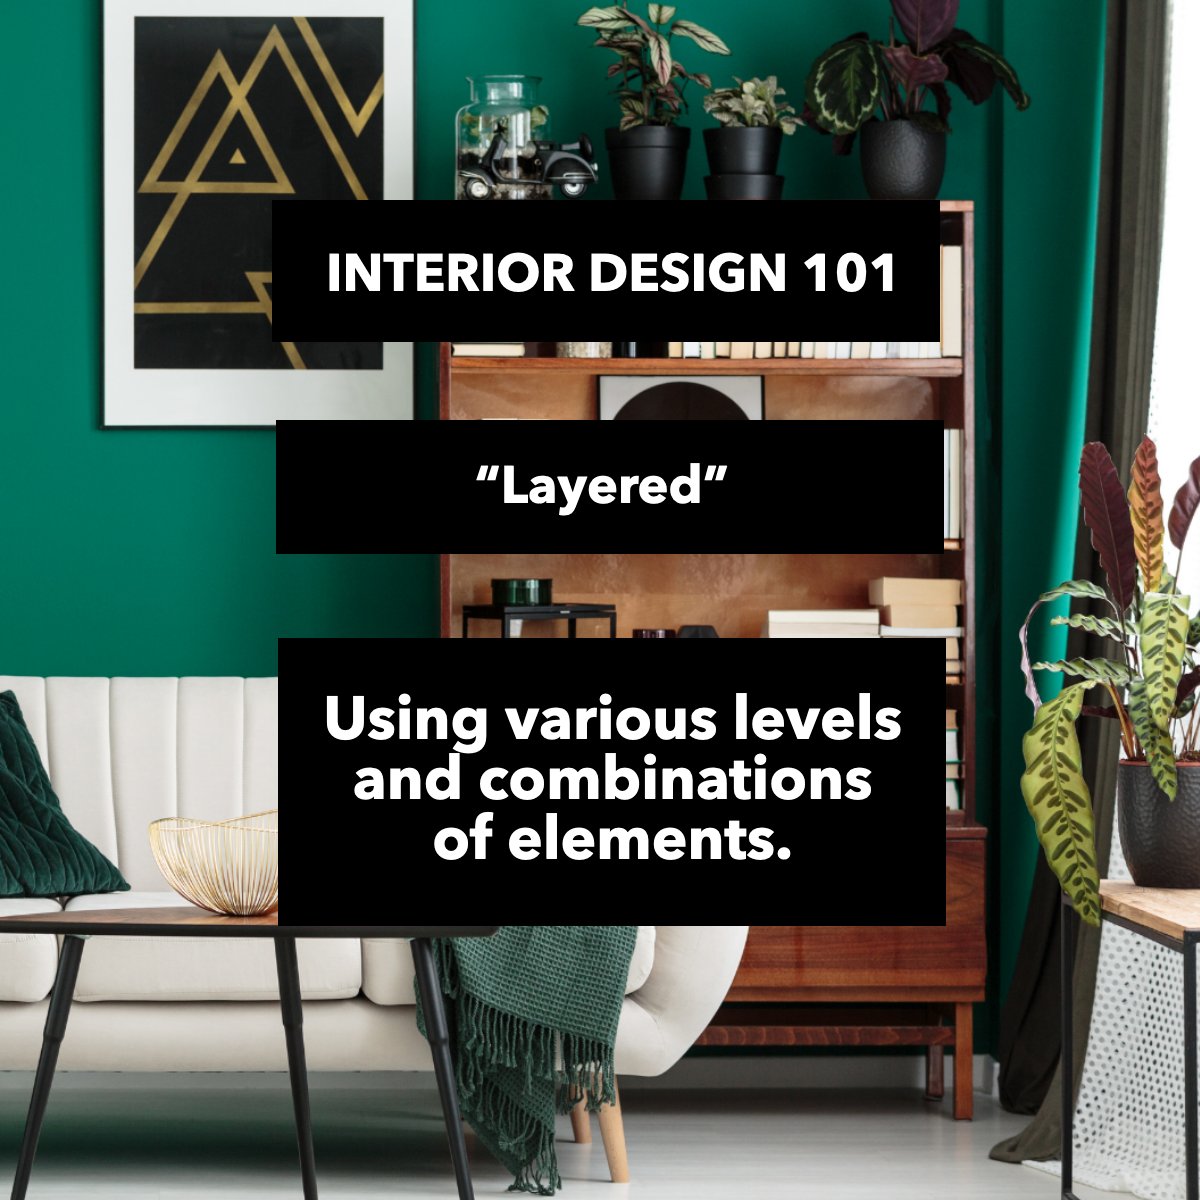 🧠 Are you trying to explore new style ideas for your home?

How about 'layered' interior design?

#interiorsdesign #interiortrends #interiordesigning #interiordesigntrends #interiorsaddict #interiordesigntips #interiordesigngoals 
 #homeswithtiffany #homegoals